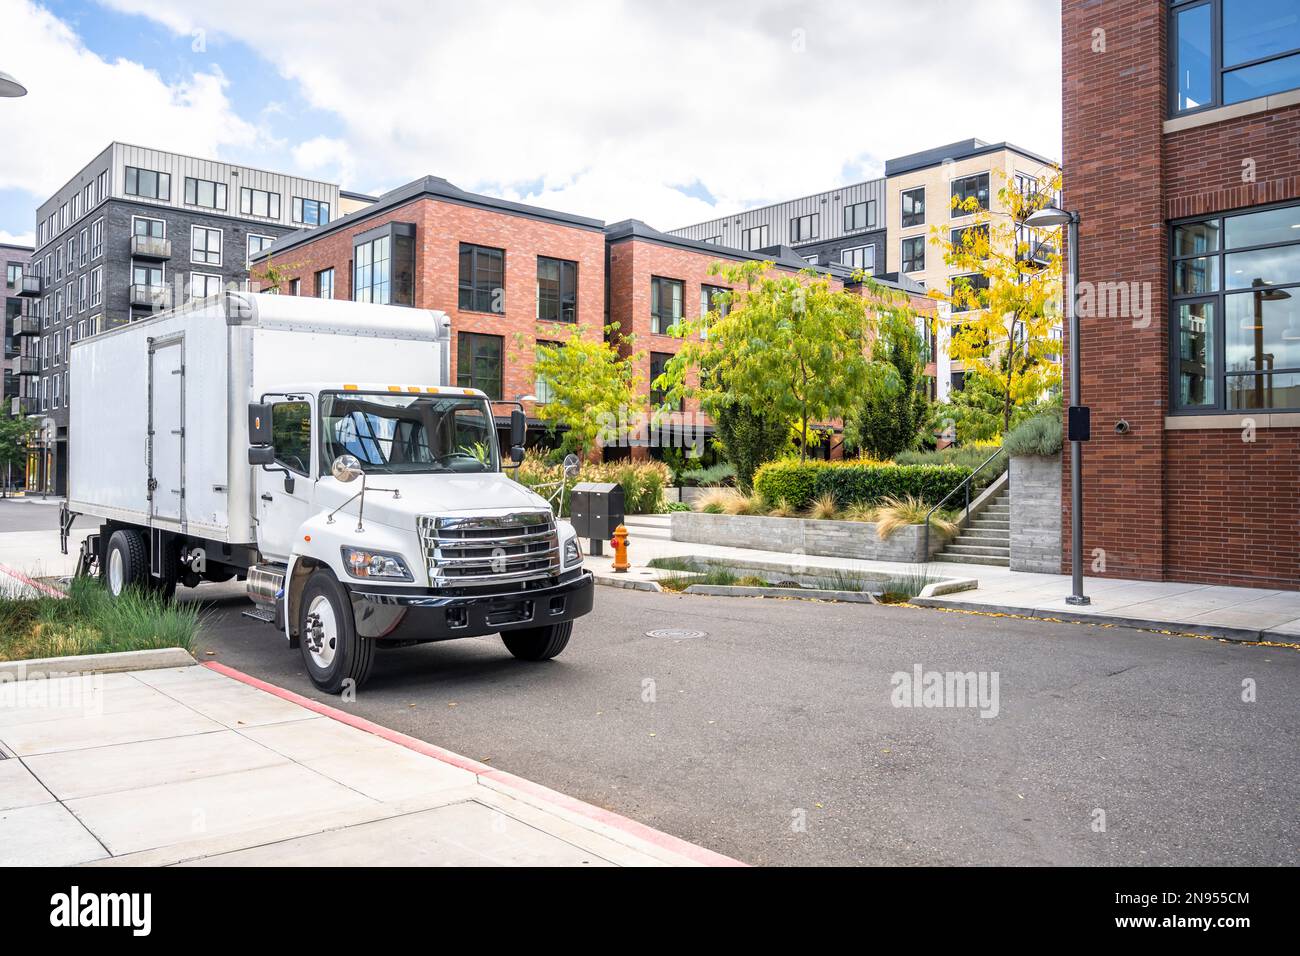 Industrial commercial compact middle duty rig white day cab semi truck tractor transporting cargo in box trailer standing on the urban city street wit Stock Photo